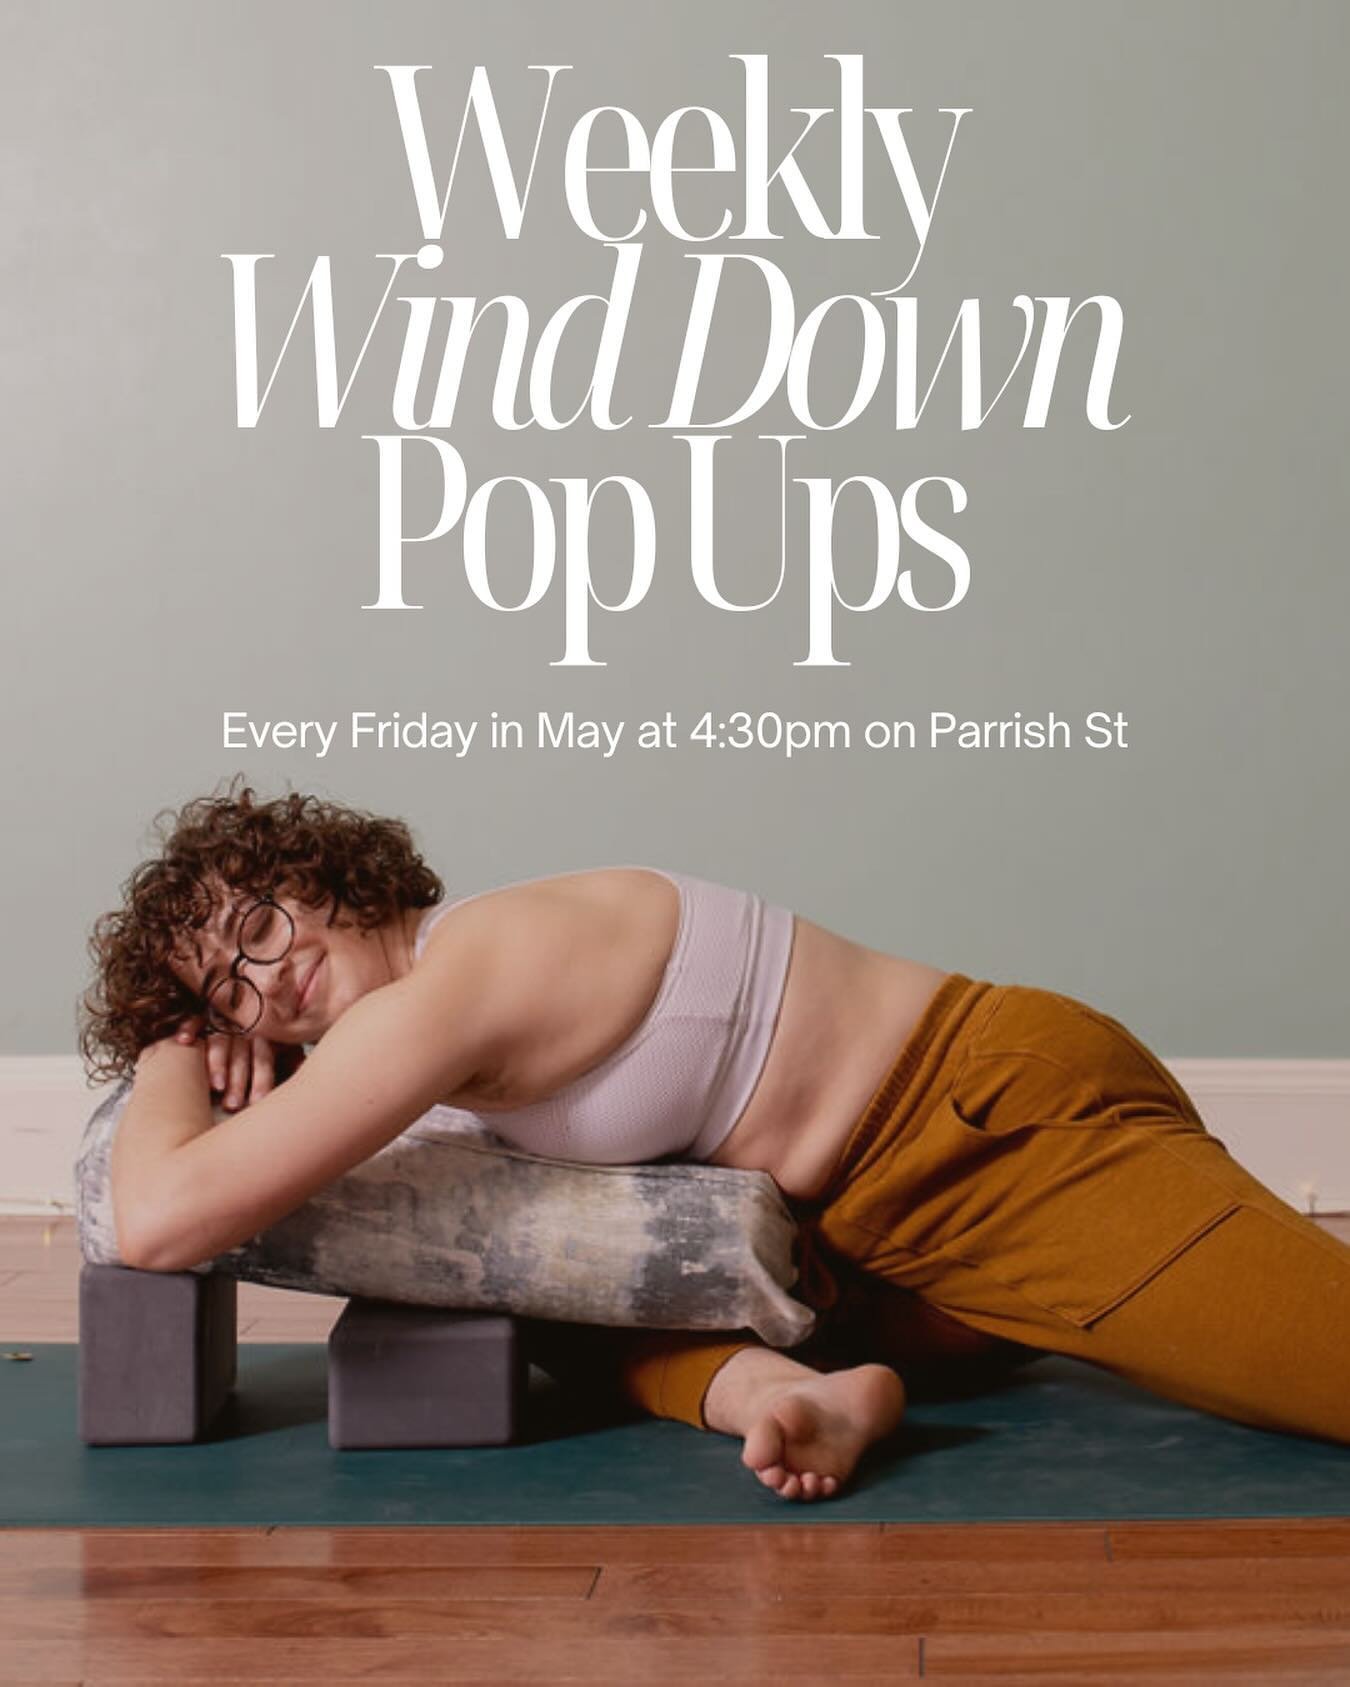 Double Down on the Wind Down with @mindfulnessofthemat 😌⁠
⁠
Sam is doubling the relaxation with not one, but two Weekly Wind Down Flows throughout the month of May!⁠
⁠
She&rsquo;ll be hosting a 4:30pm Weekly Wind Down Pop-Up series at Parrish for fo